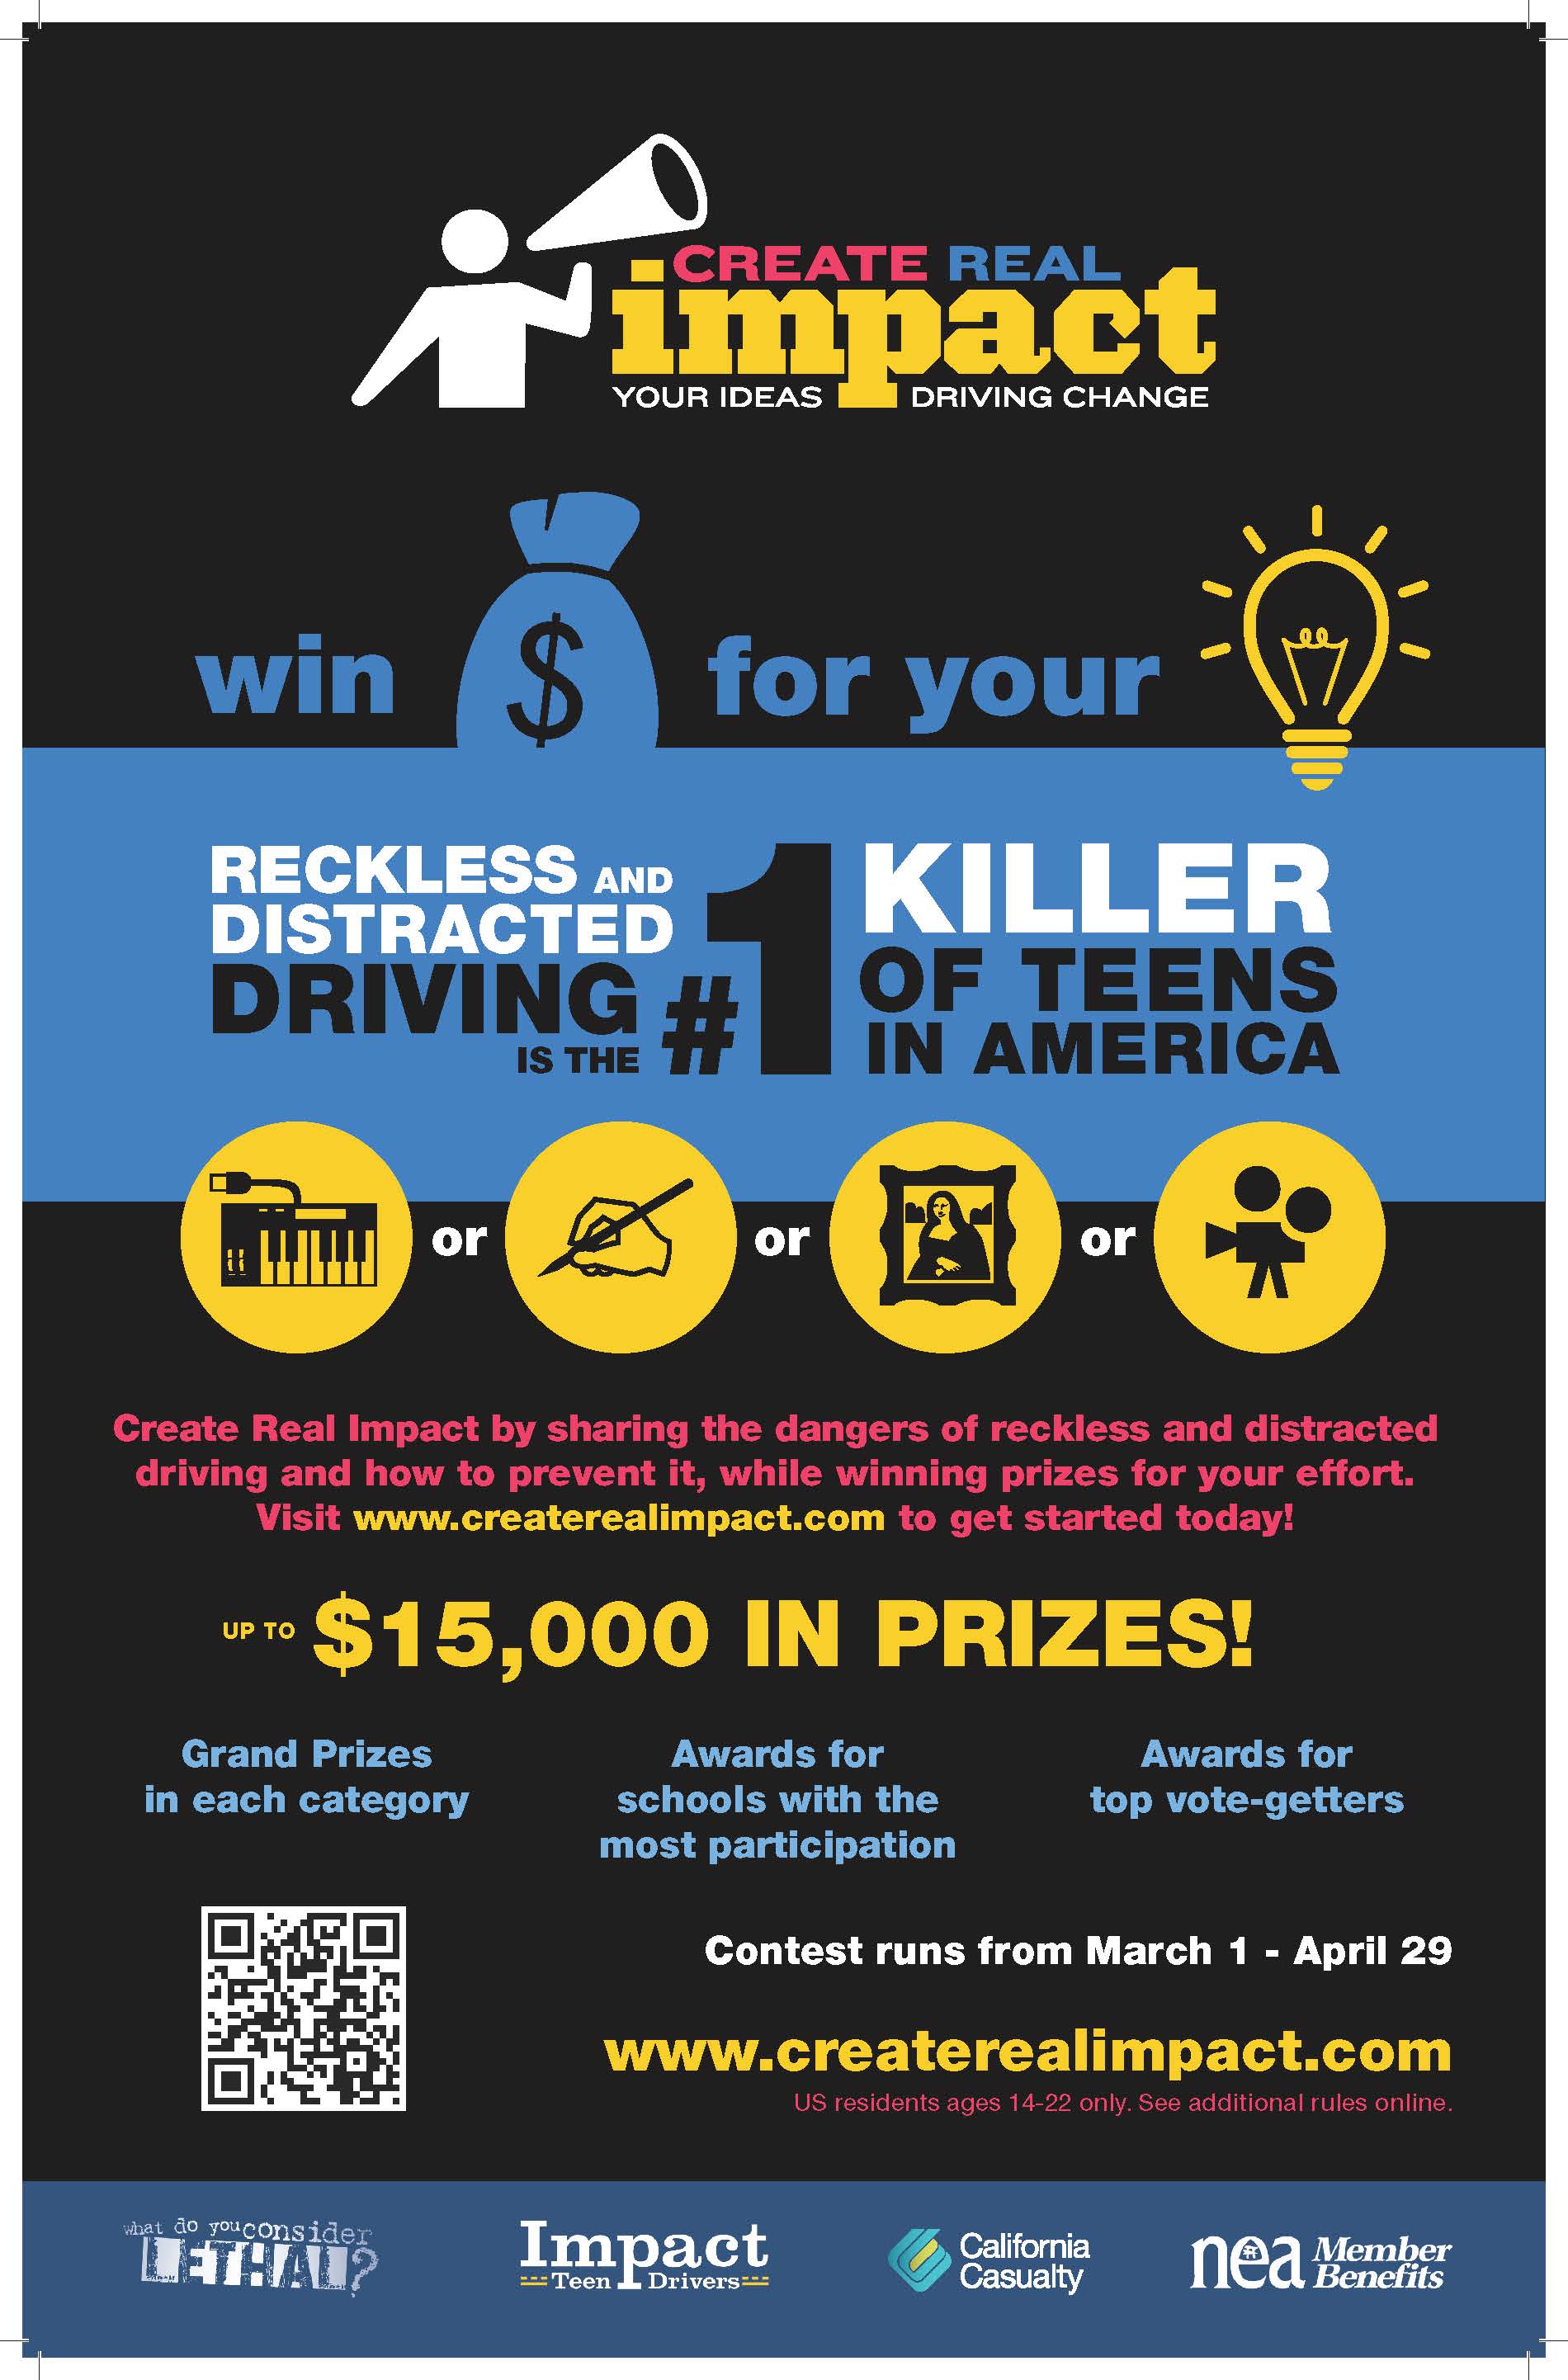 The Spring 2016 Create Real Impact Contest